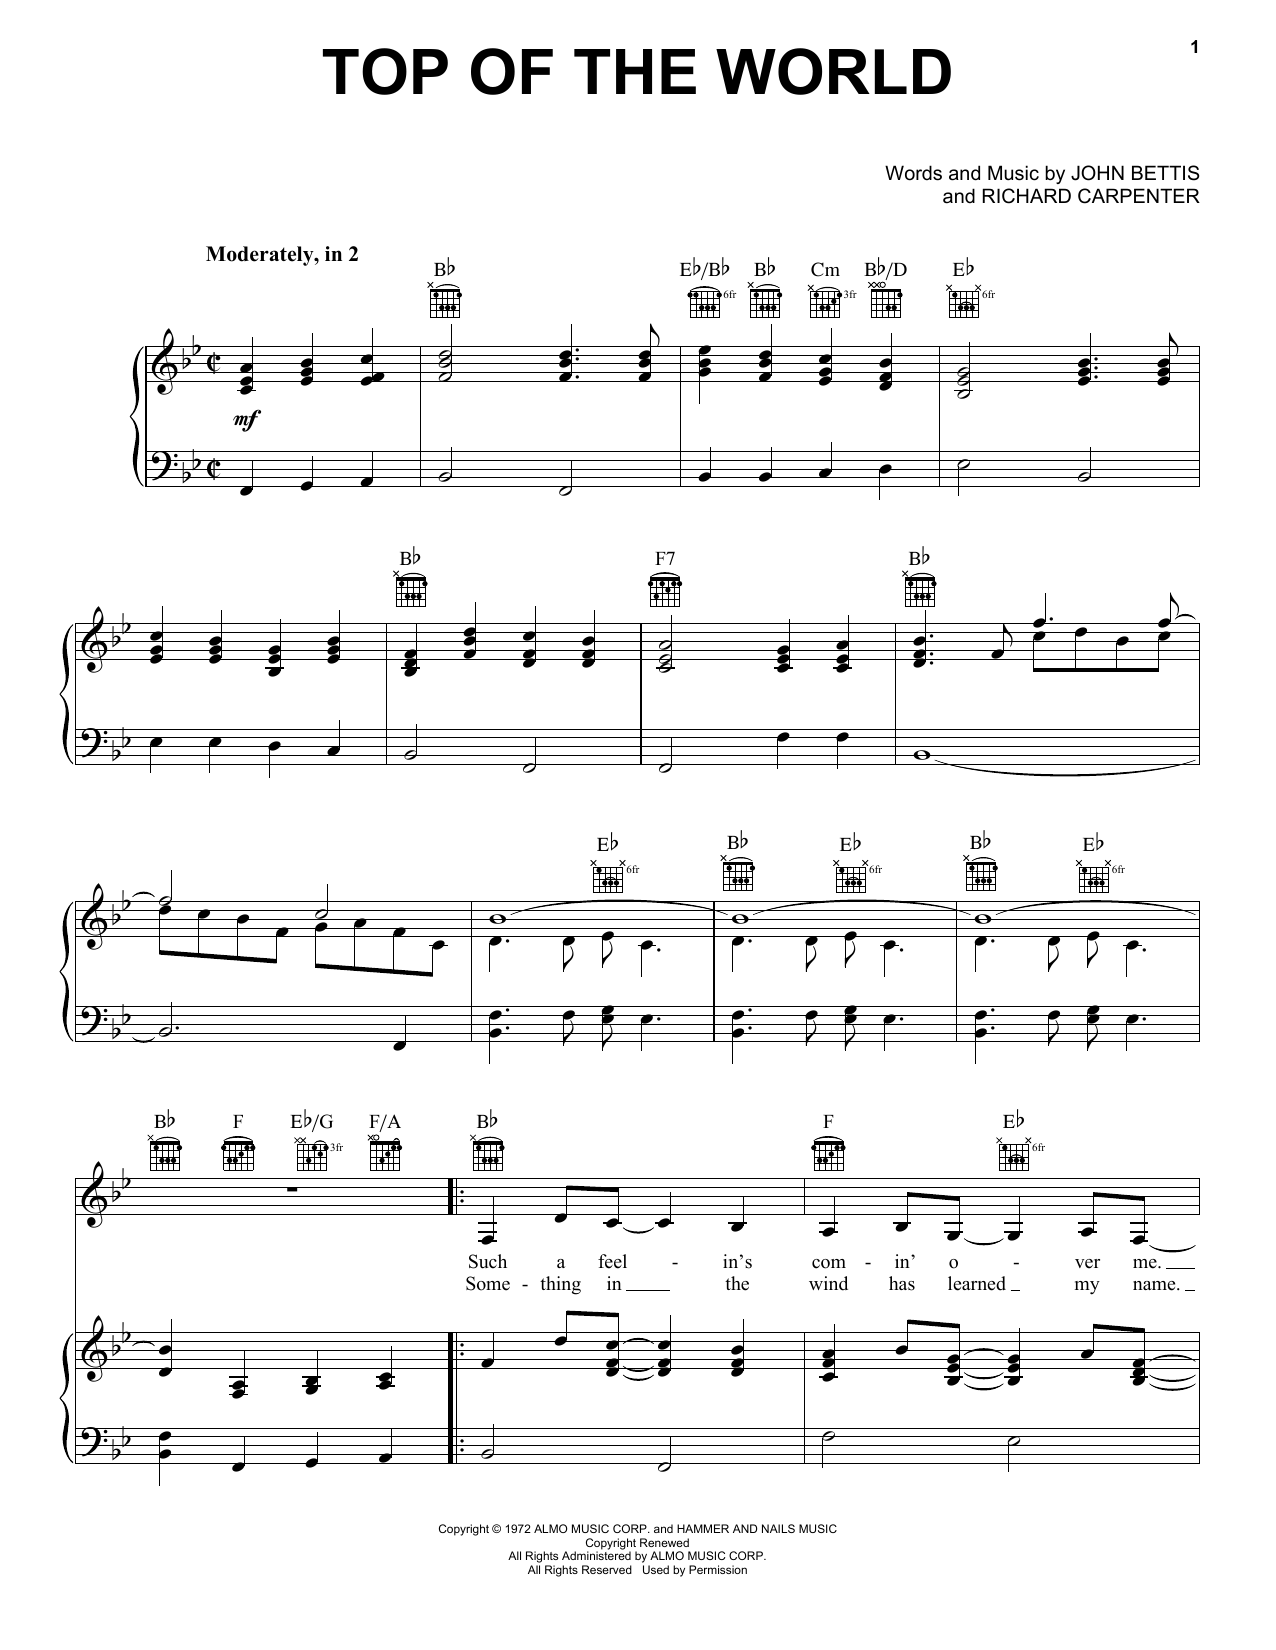 Carpenters Top Of The World sheet music notes and chords. Download Printable PDF.